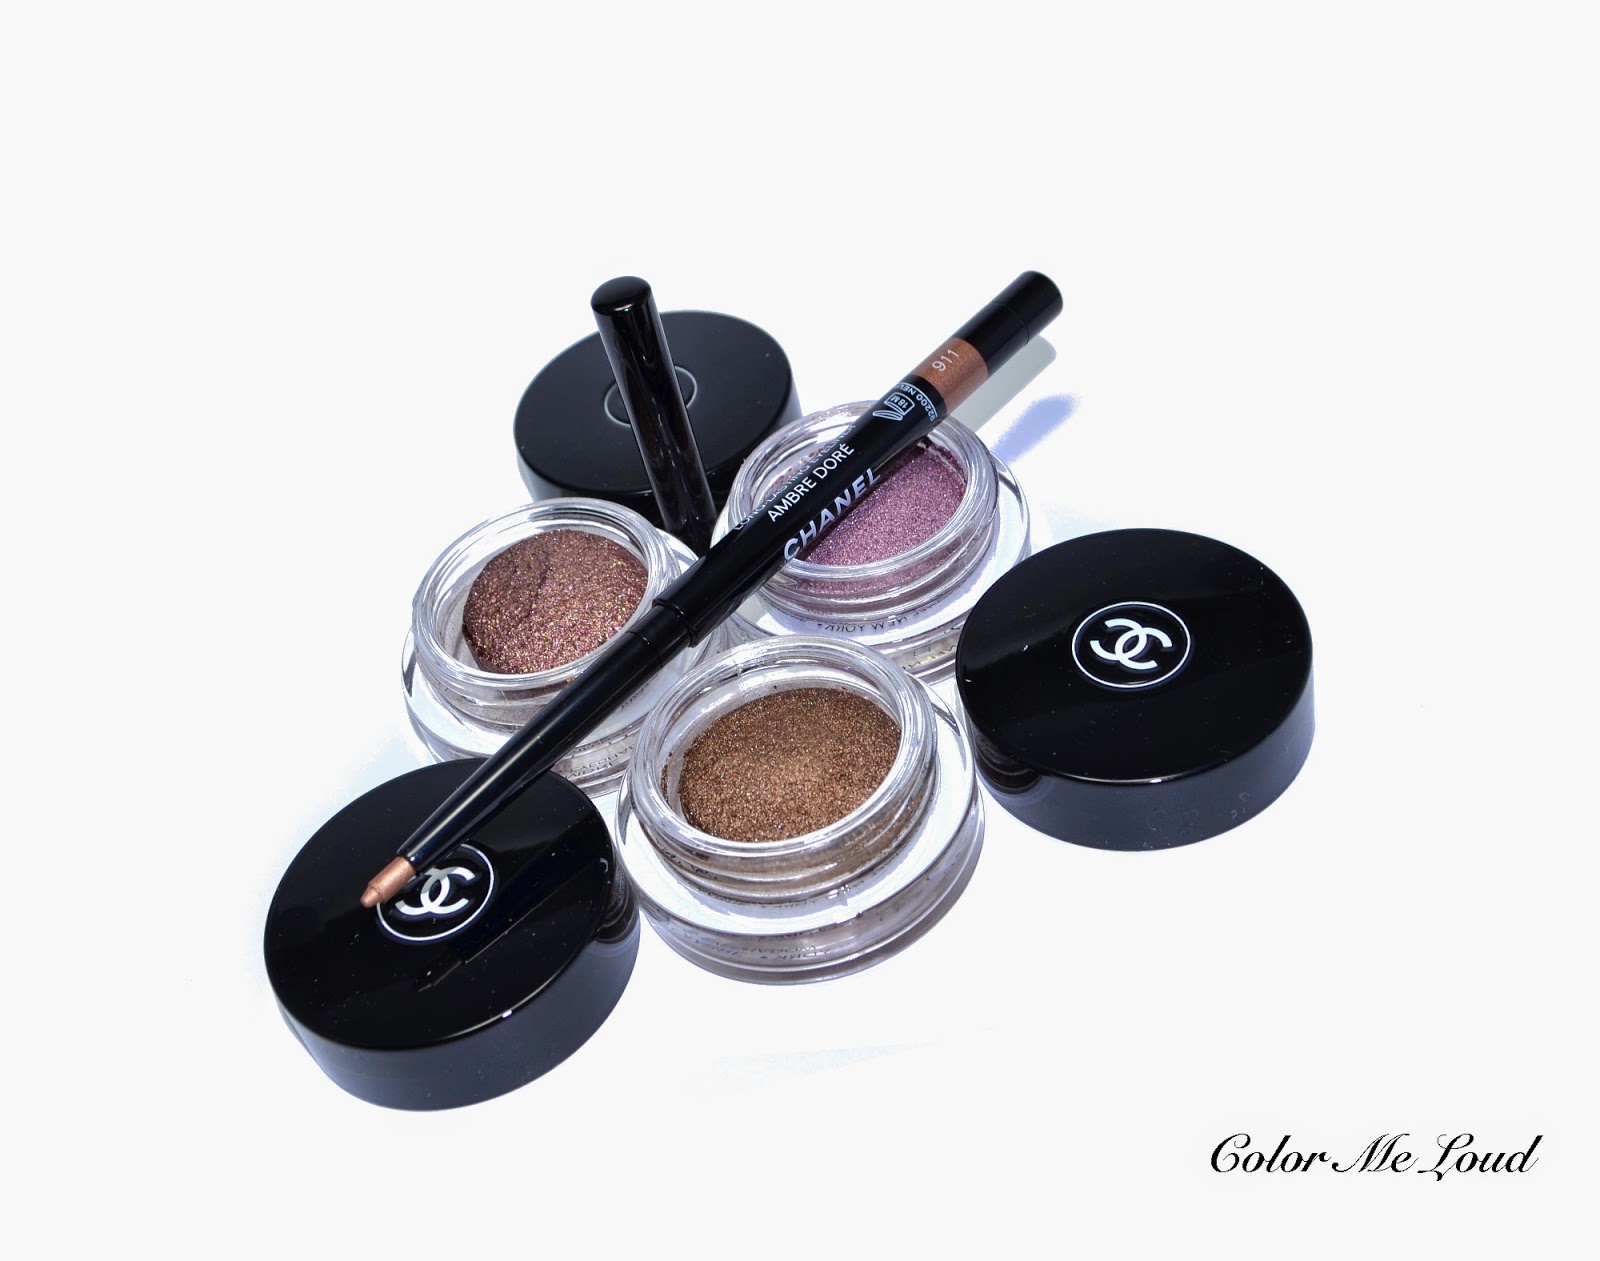 Chanel Is Going to Make You Want to Sleep in Your Eye Makeup